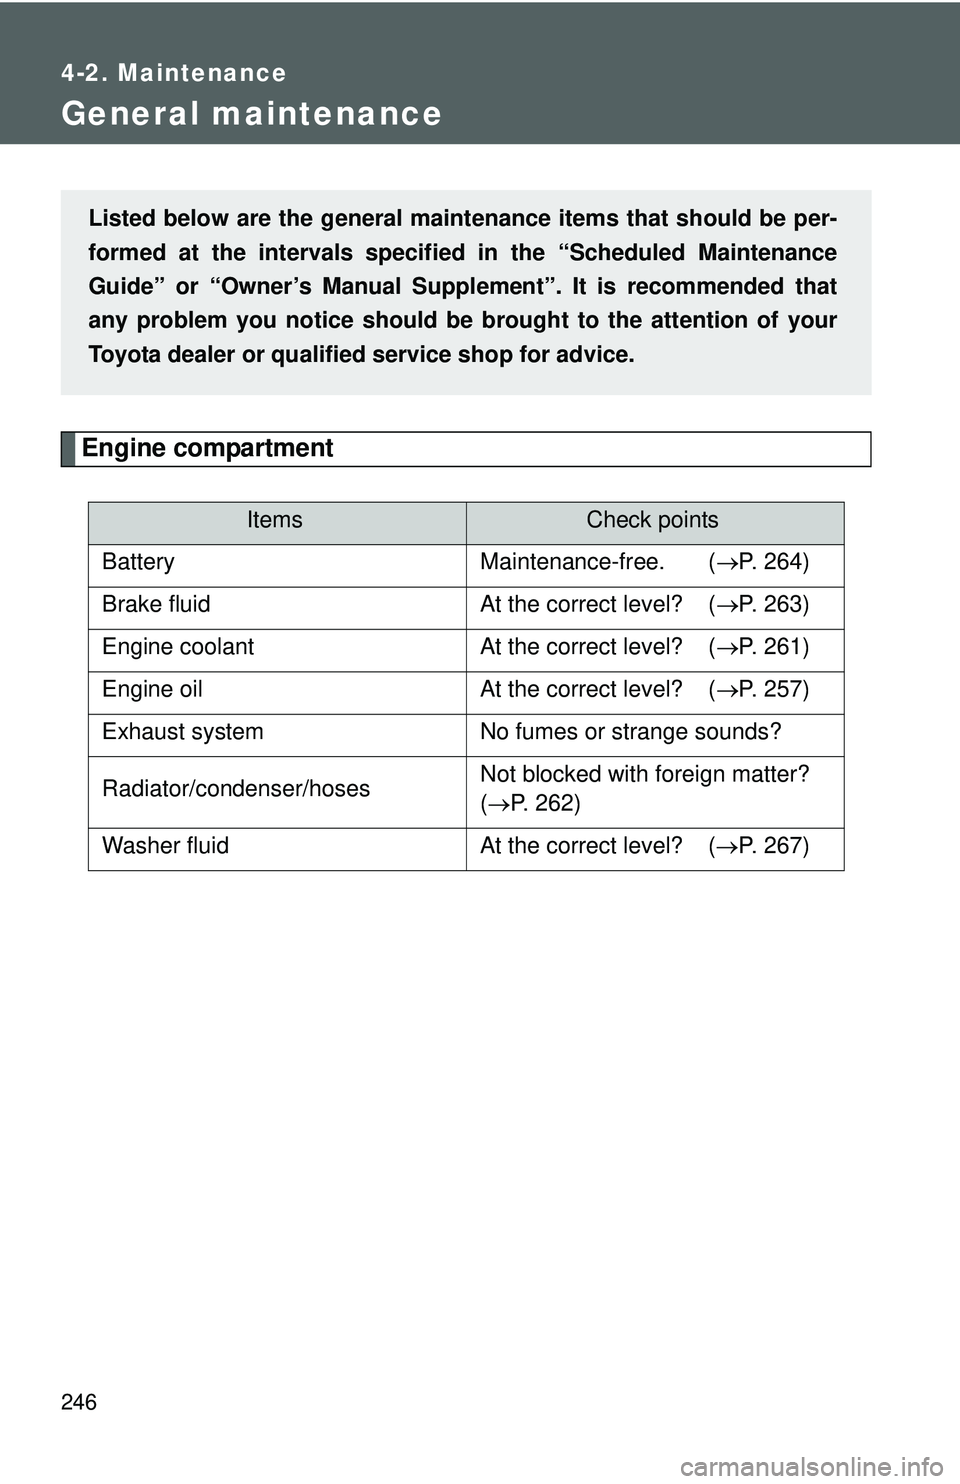 TOYOTA YARIS HATCHBACK 2011  Owners Manual 246
4-2. Maintenance
General maintenance
Engine compartment
ItemsCheck points
Battery Maintenance-free.  ( →P. 264)
Brake fluid At the correct level?  ( →P. 263)
Engine coolant At the correct leve